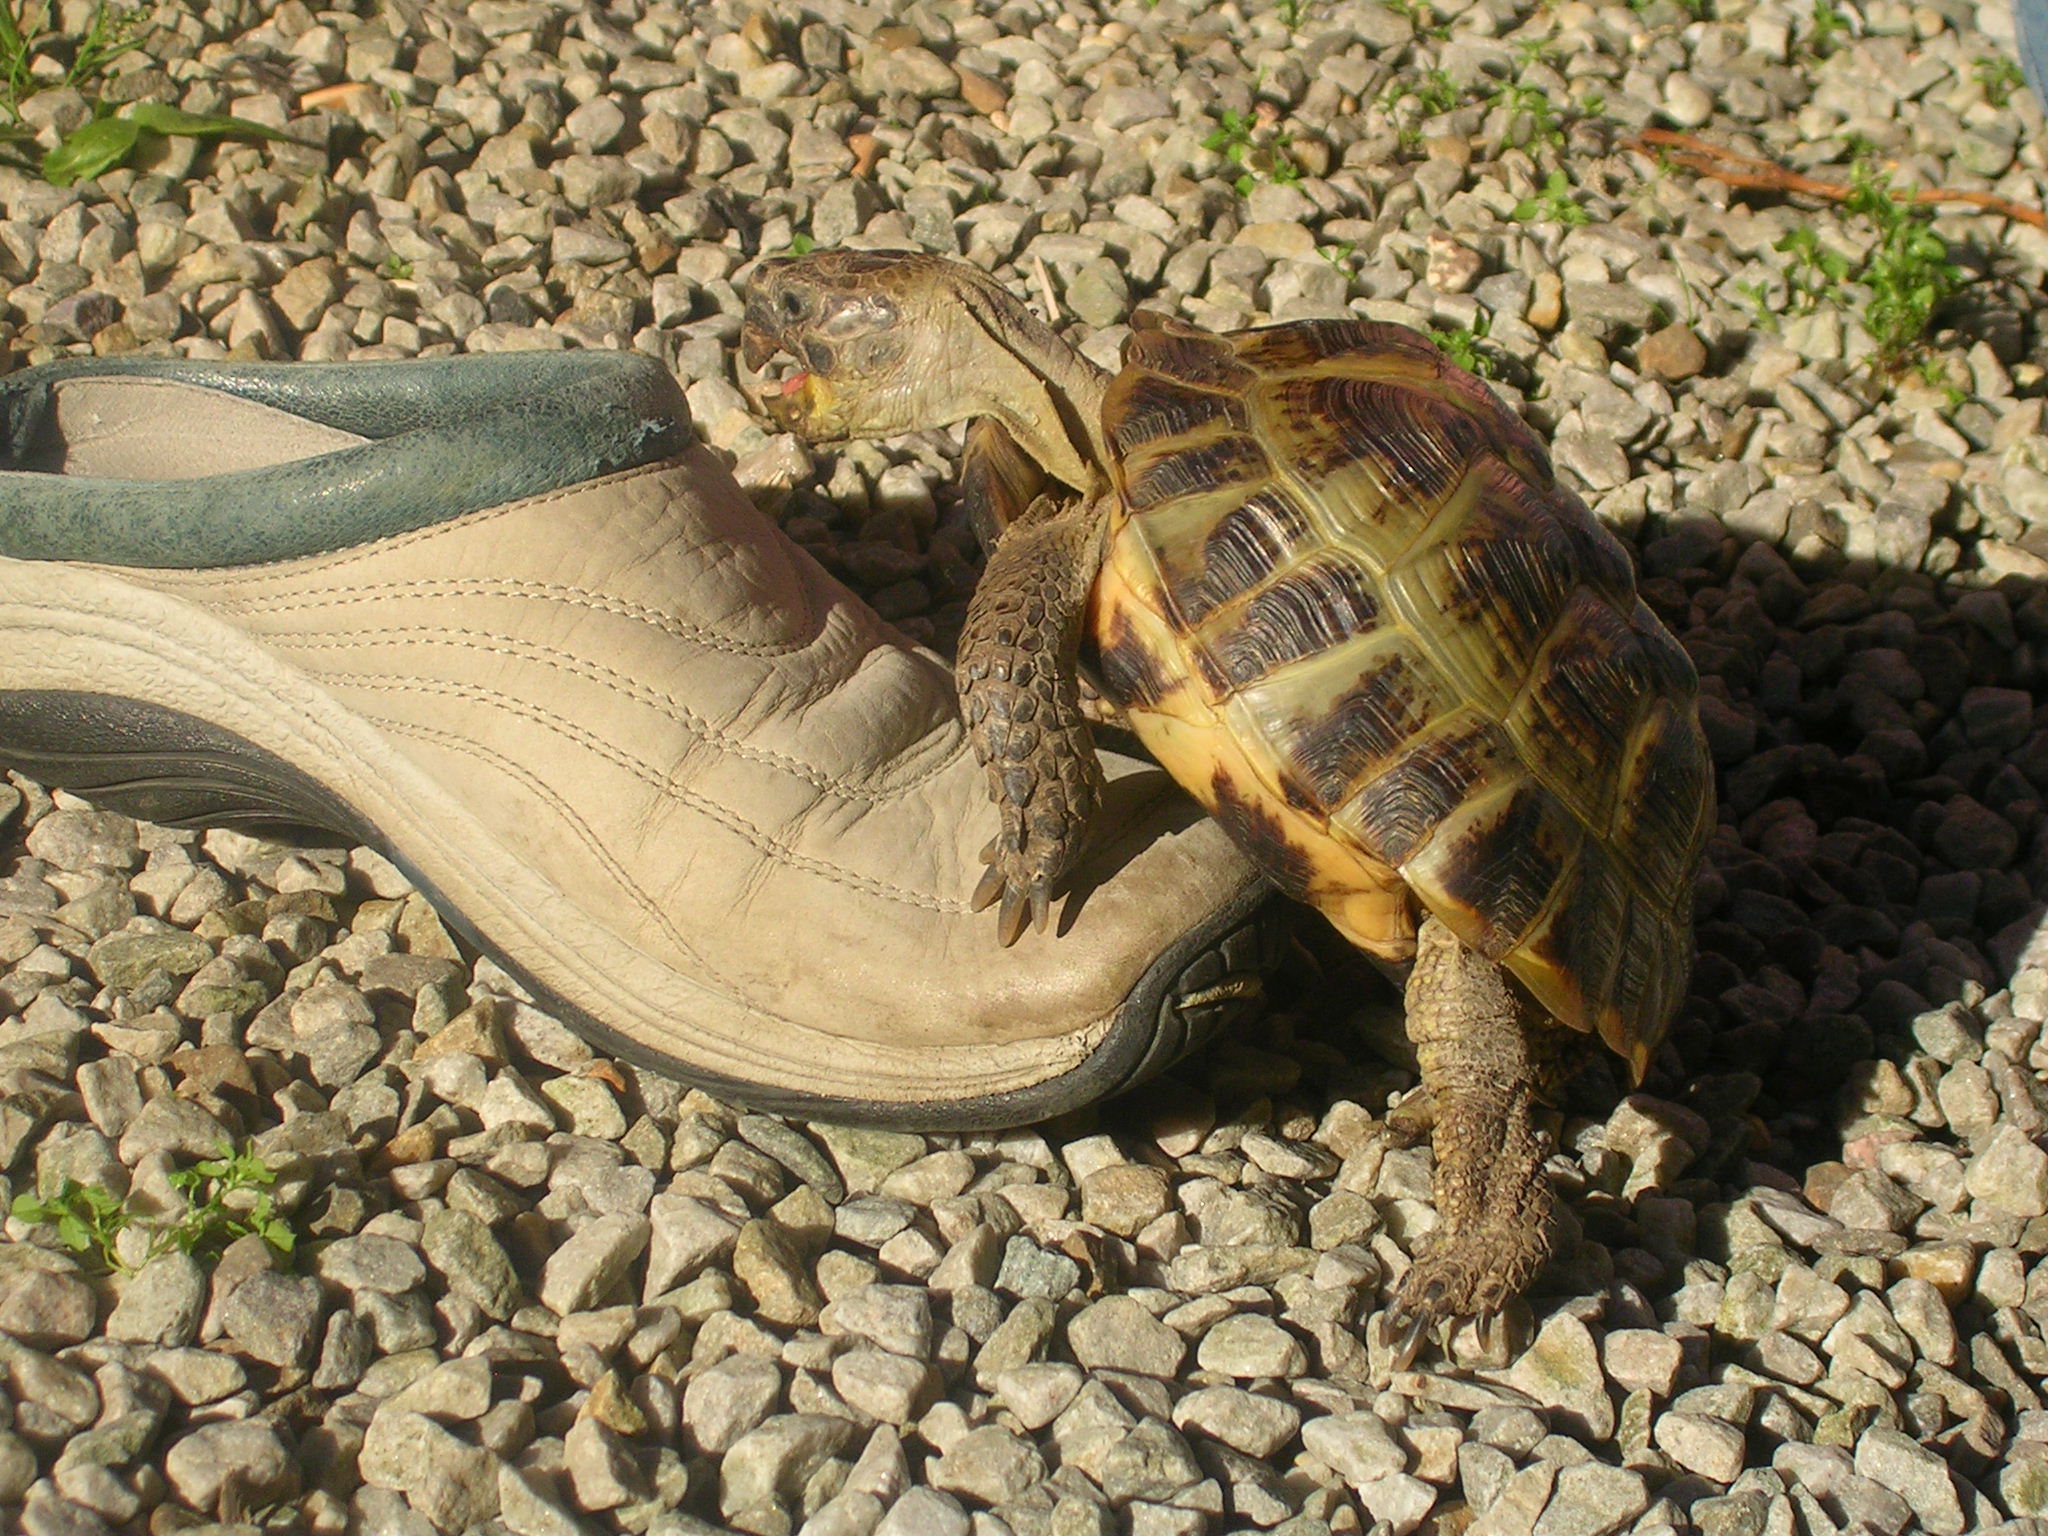 Testudo_horsfieldii_mating_with_a_shoe.jpg